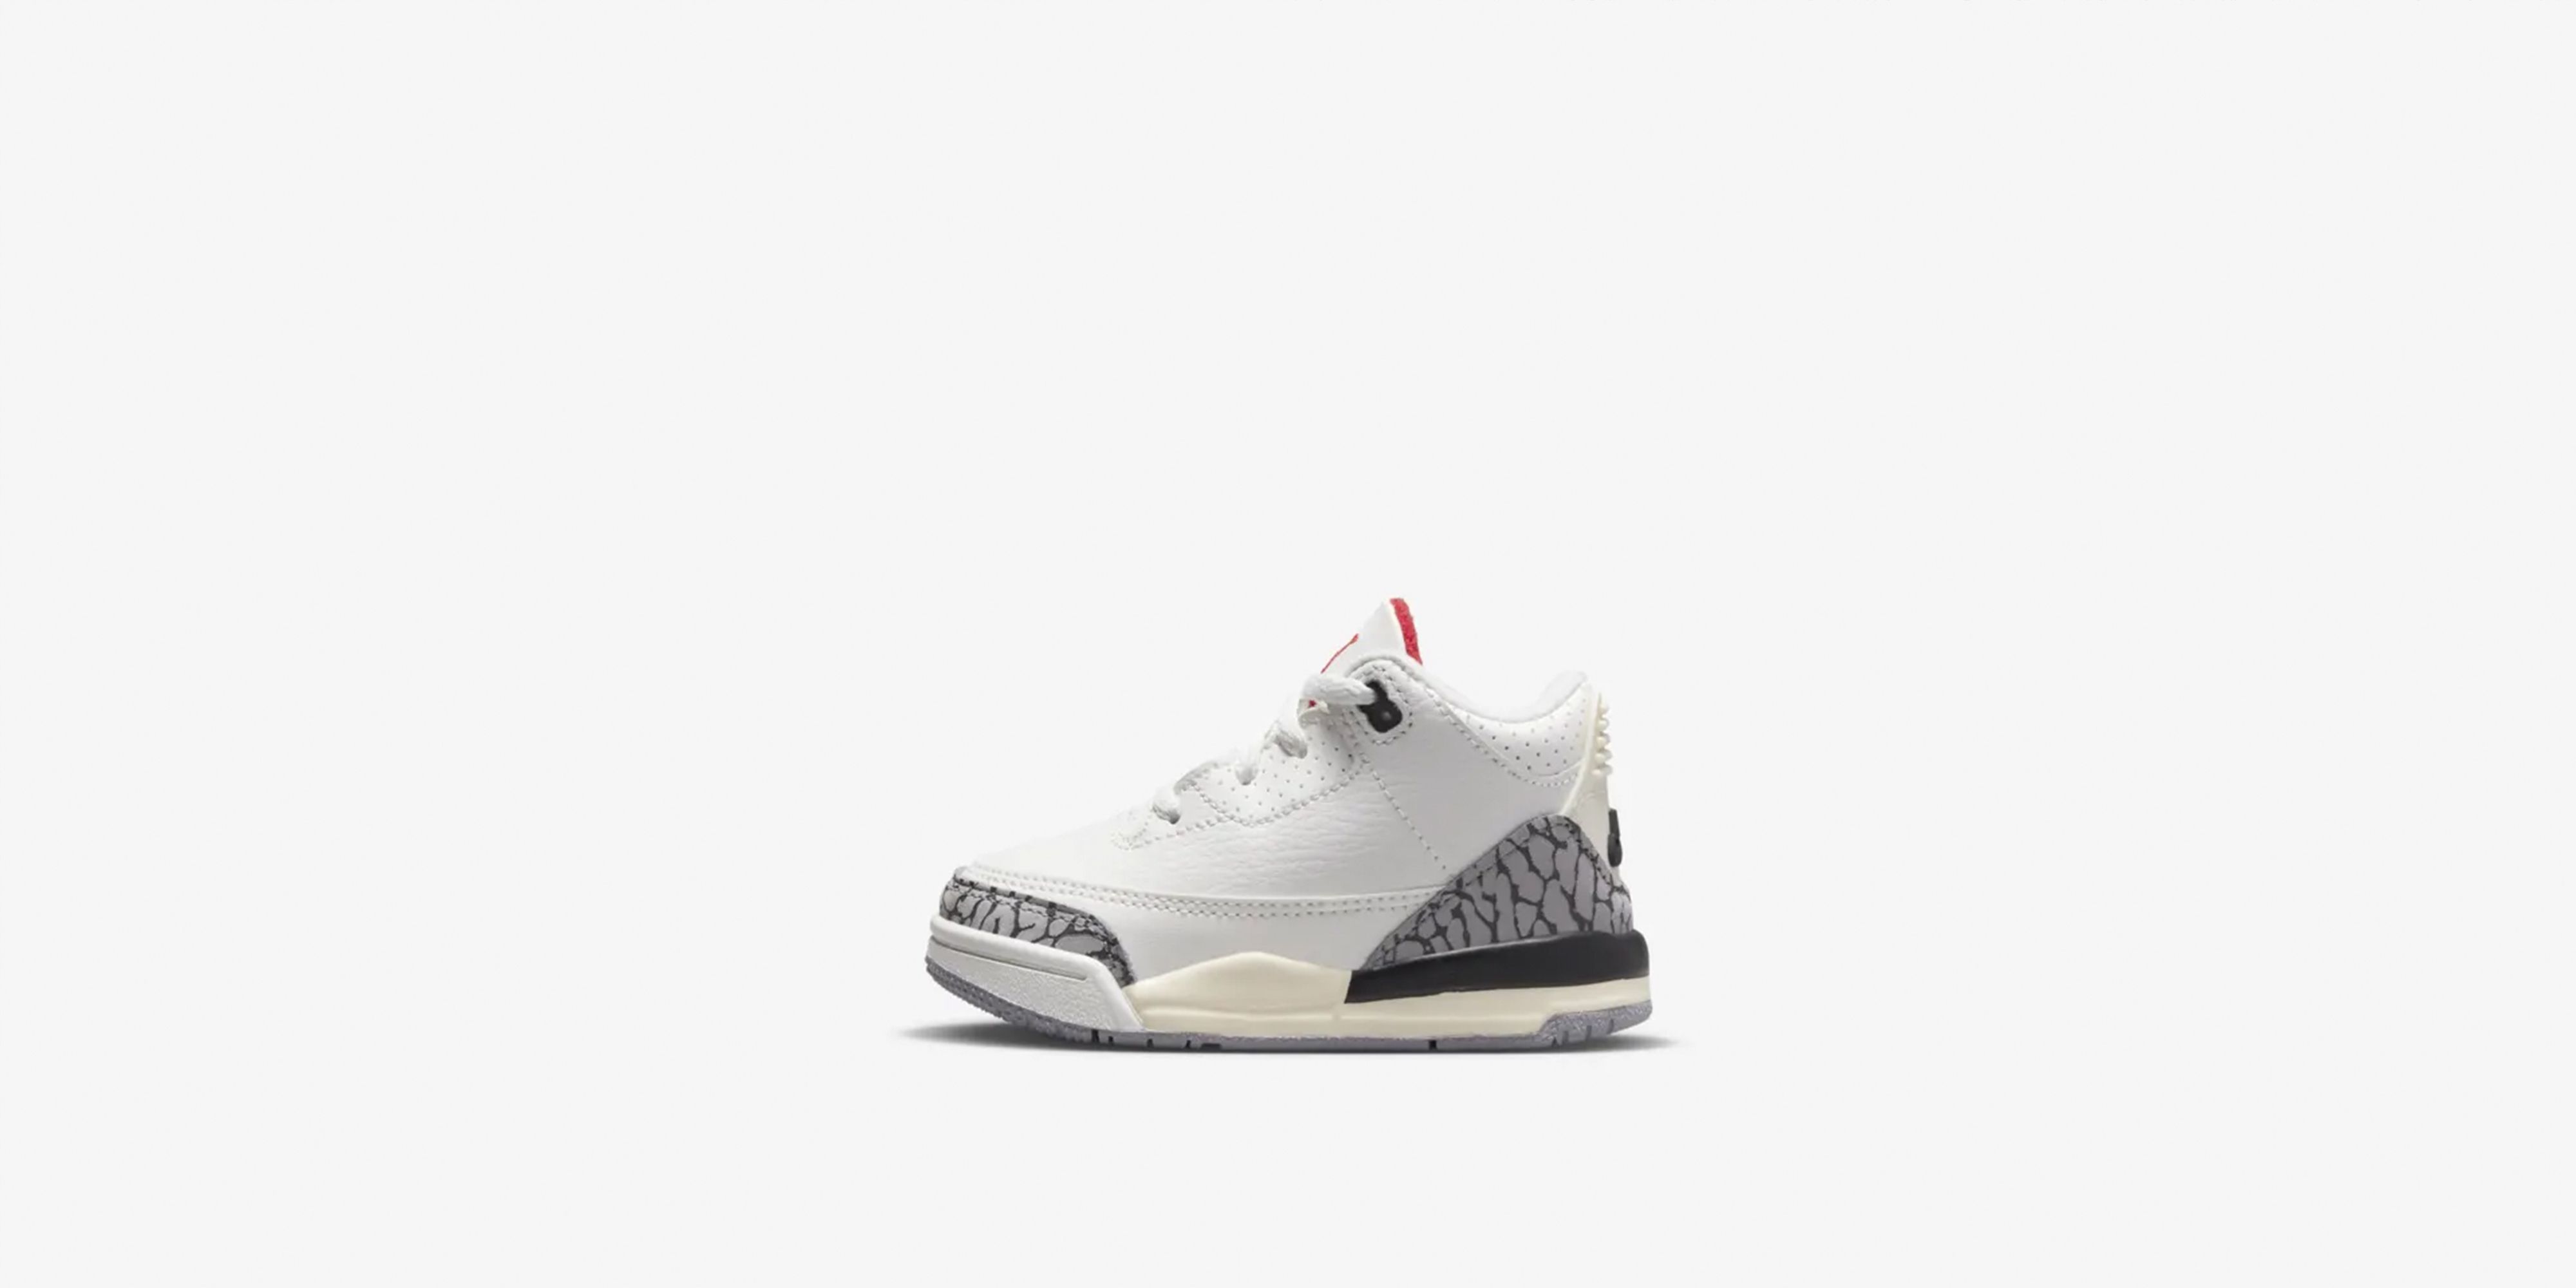 How to Buy the Air Jordan 3 'White Cement Re-Imagined' | Price 